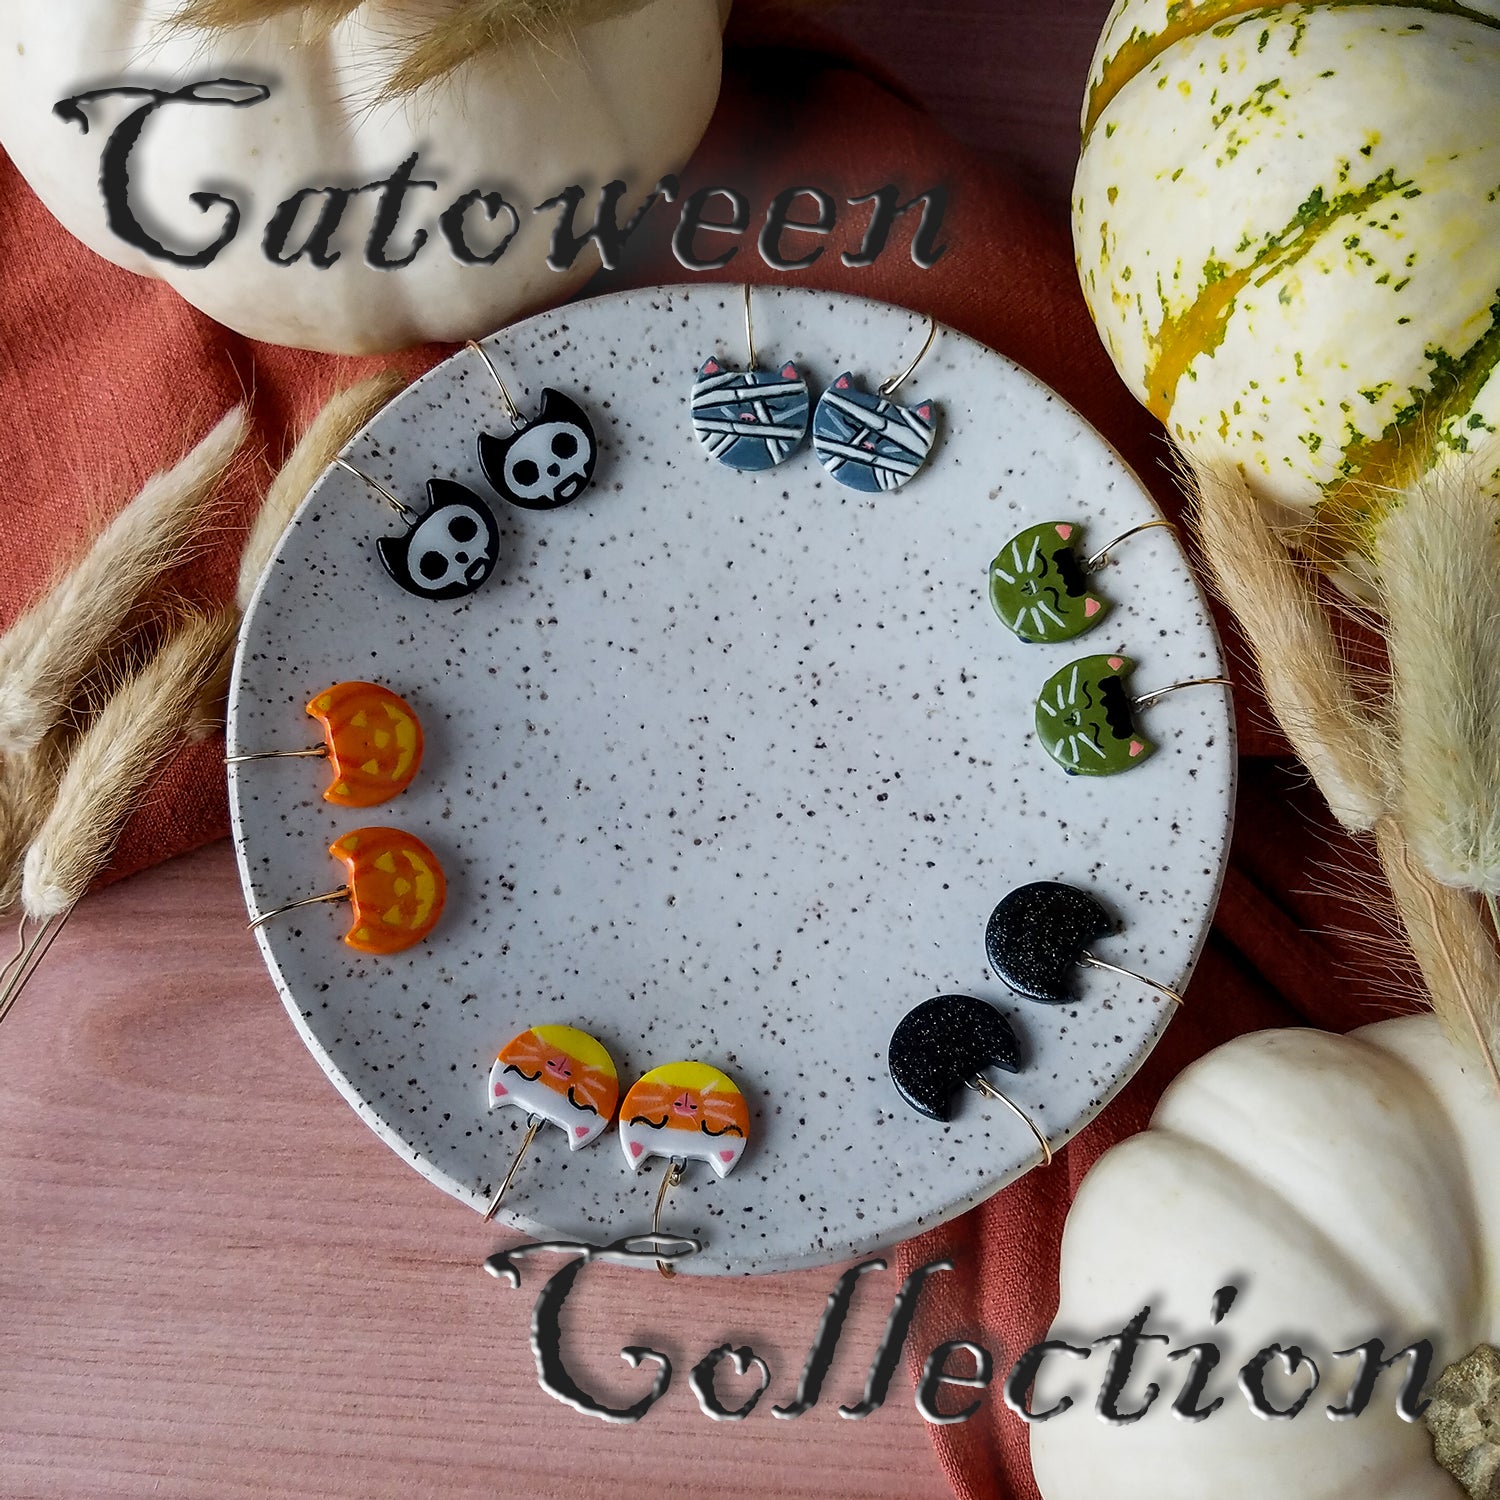 Cat-head-shaped earrings from the Catoween Collection surround the inside edge of a speckled white porcelain dish on a wooden table with an orange cloth, white pumpkins, and dried grasses as accents.  Earring designs include each of the one-of-a-kind Catoween Collection pieces.  Clockwise from upper left: Skelecats, Meowmies, Catenstein’s Meownsters, Black Magic Kittens, Catty Corn, and Cat-O-Lanterns.  Spooky text overlay says “Catoween Collection.”